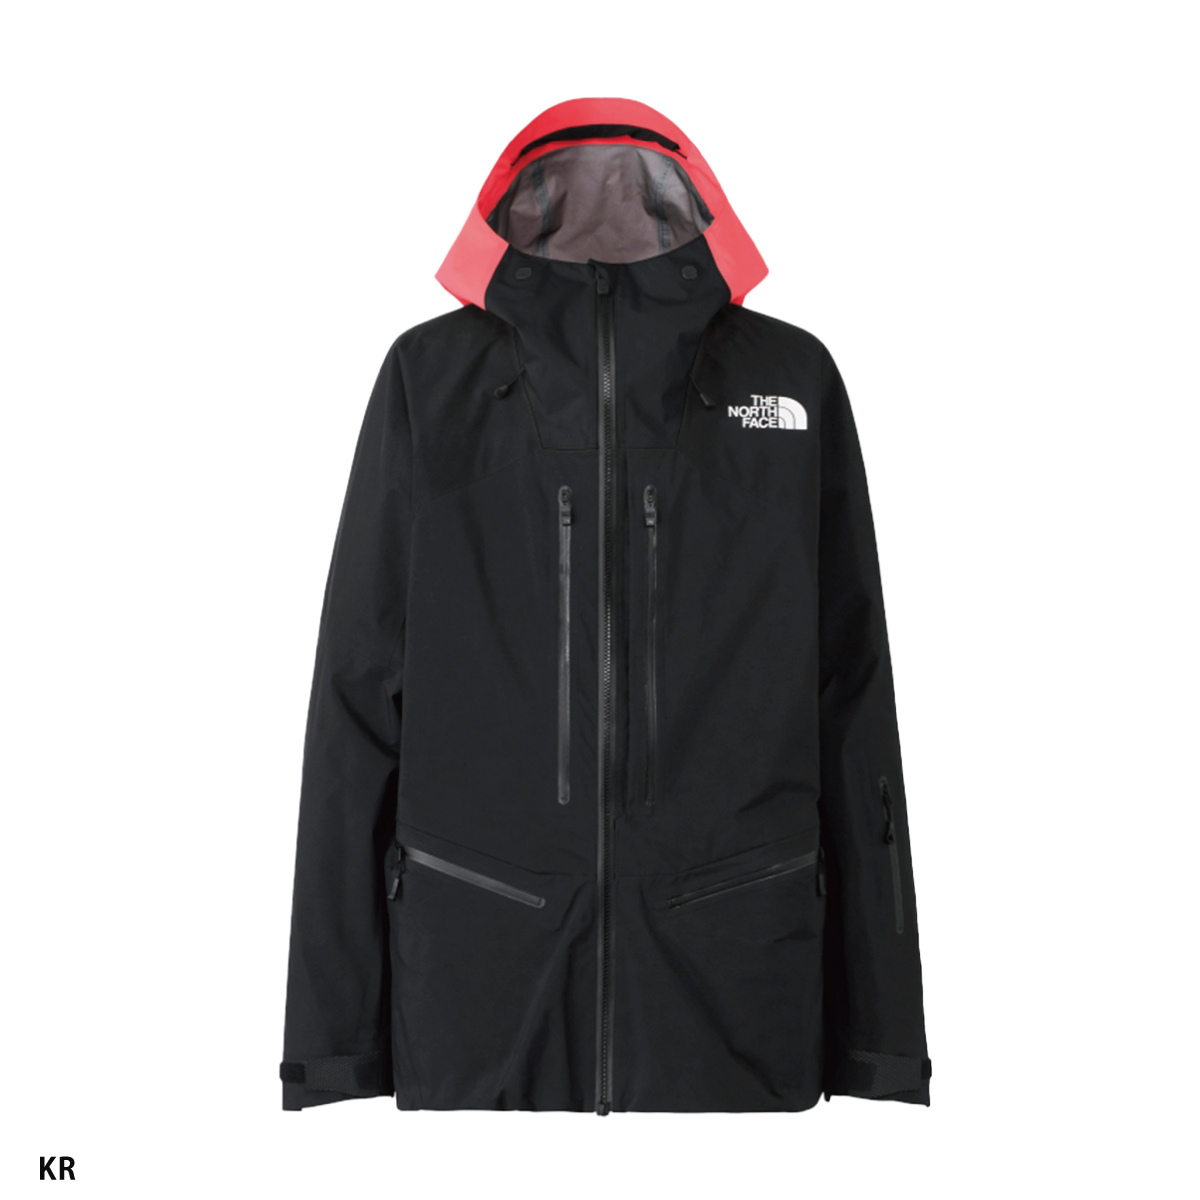 THE NORTH FACE The * North Face лыжи одежда жакет мужской женский <2024> NS62301 / RTG GORE-TEX Jacket [GORE-TEX]